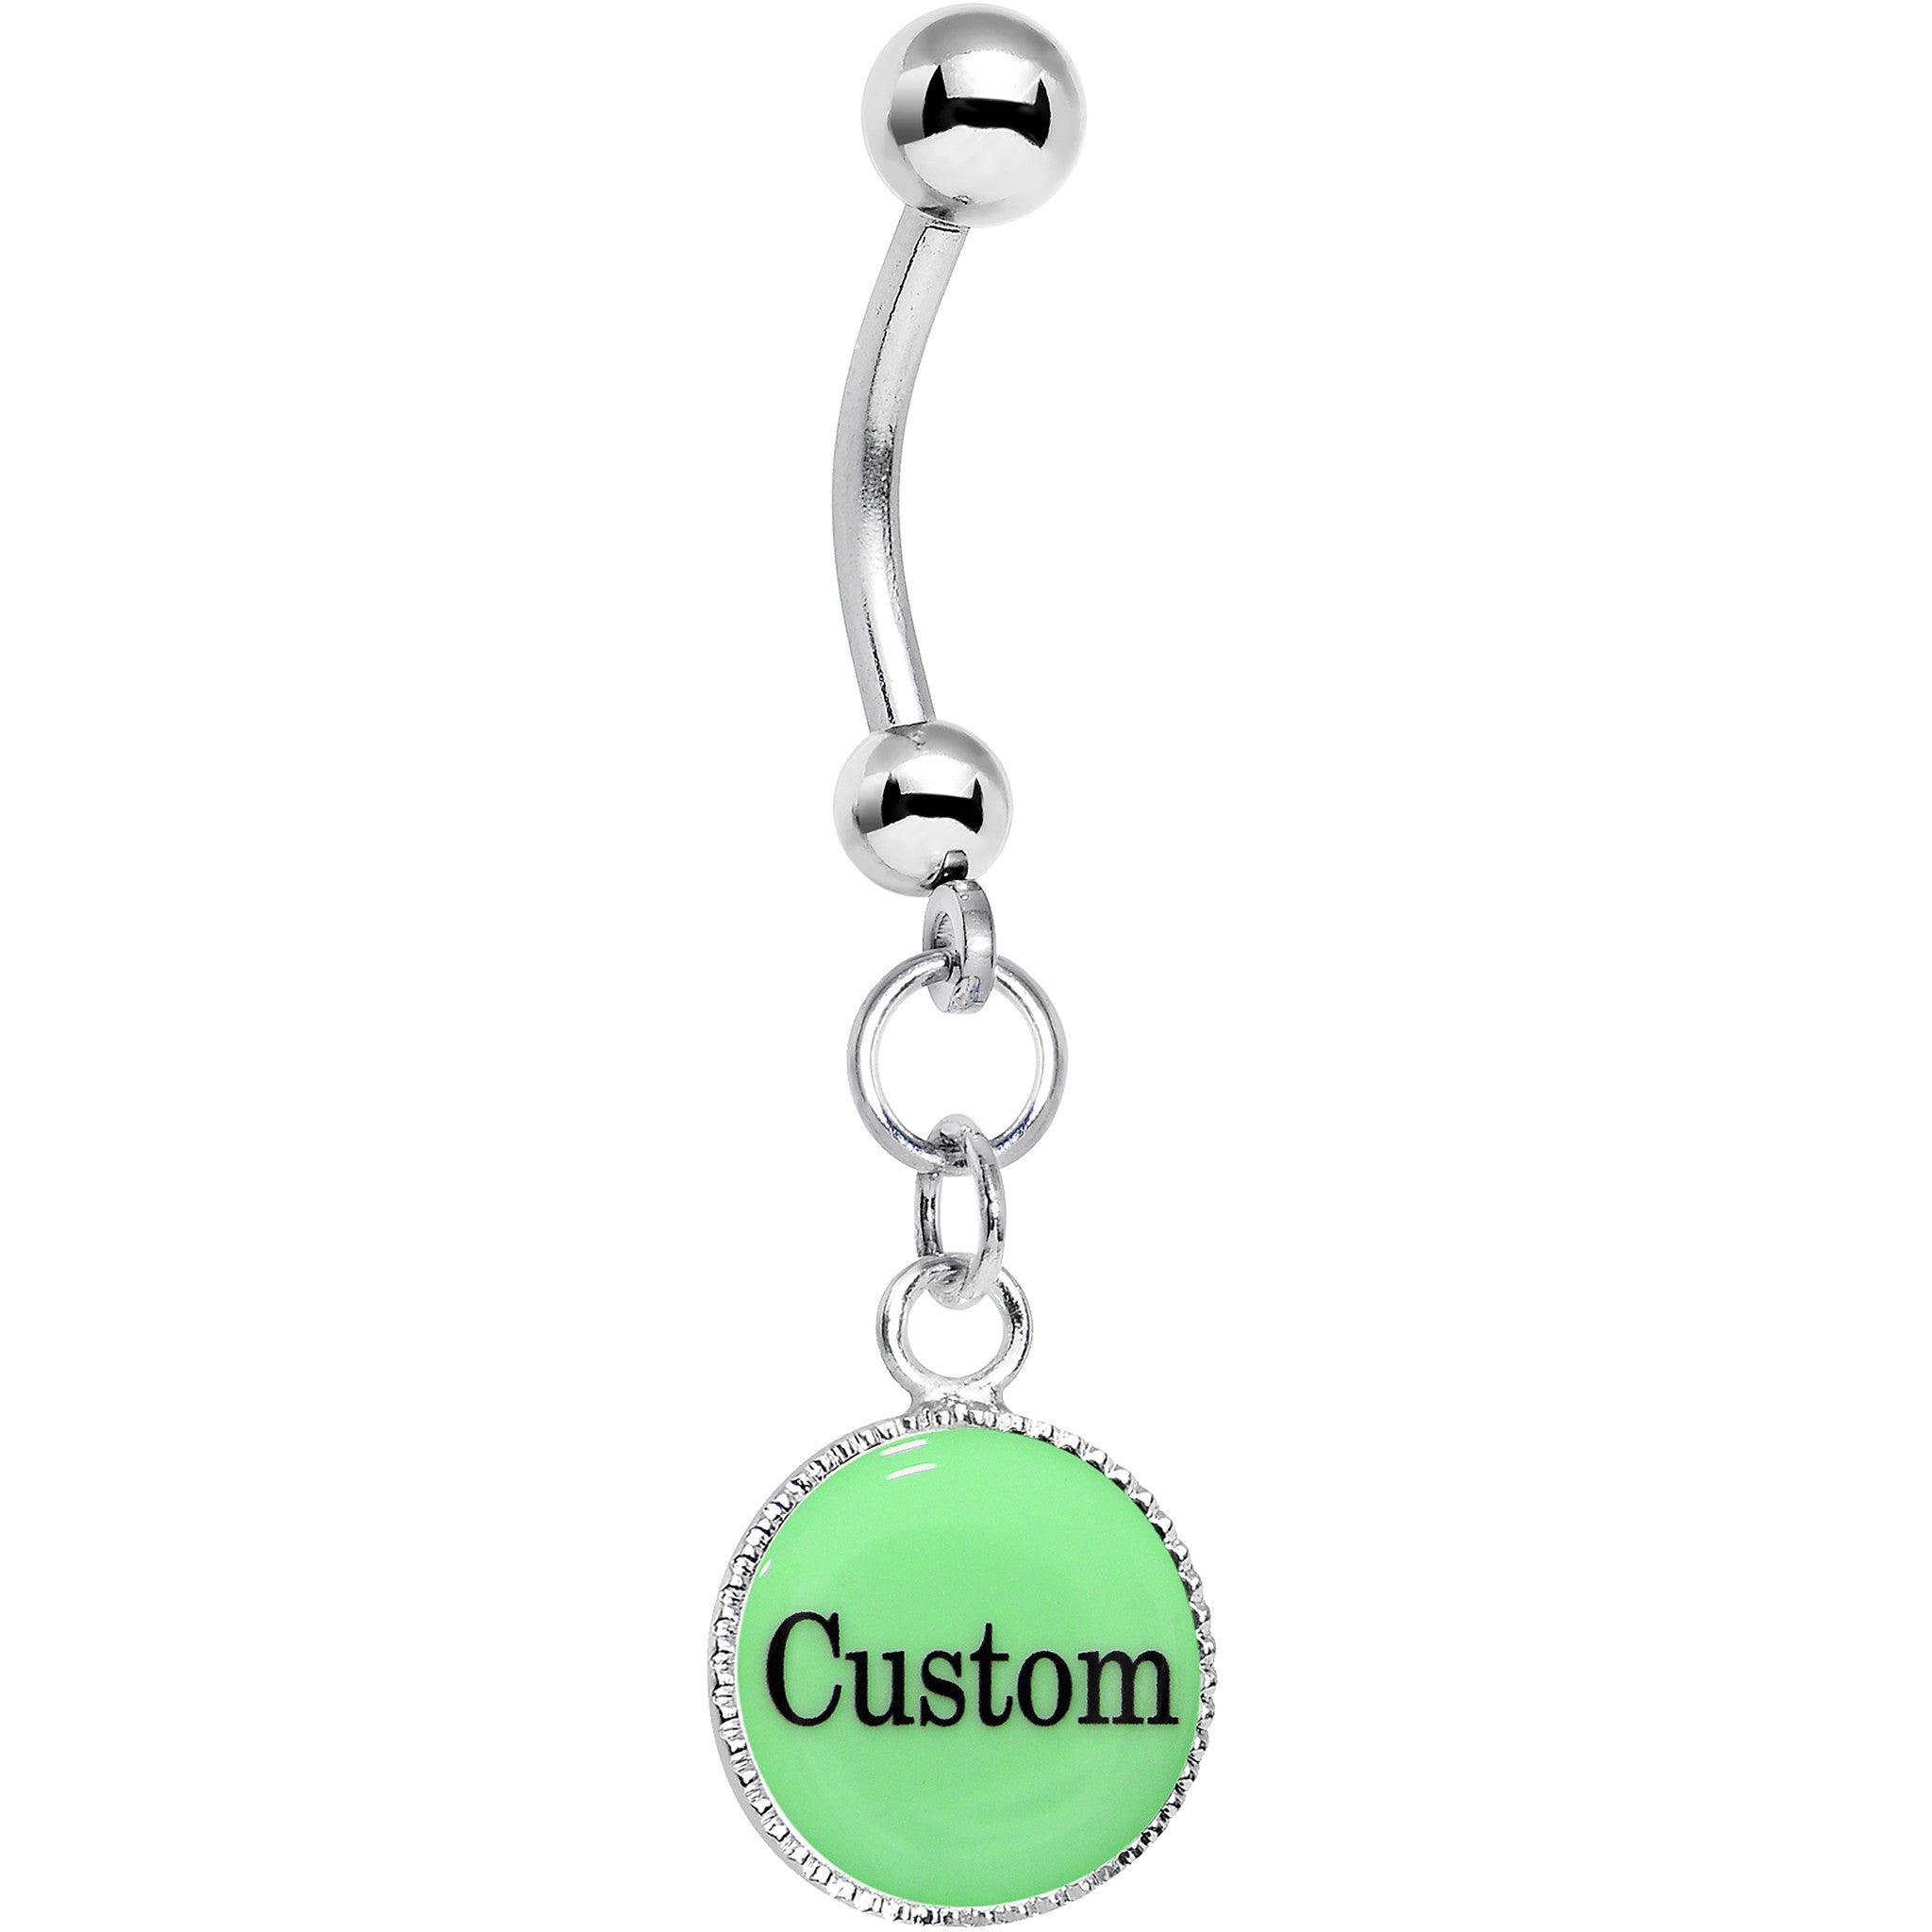 Custom Glow in the Dark Personalized Name Dangle Belly Ring